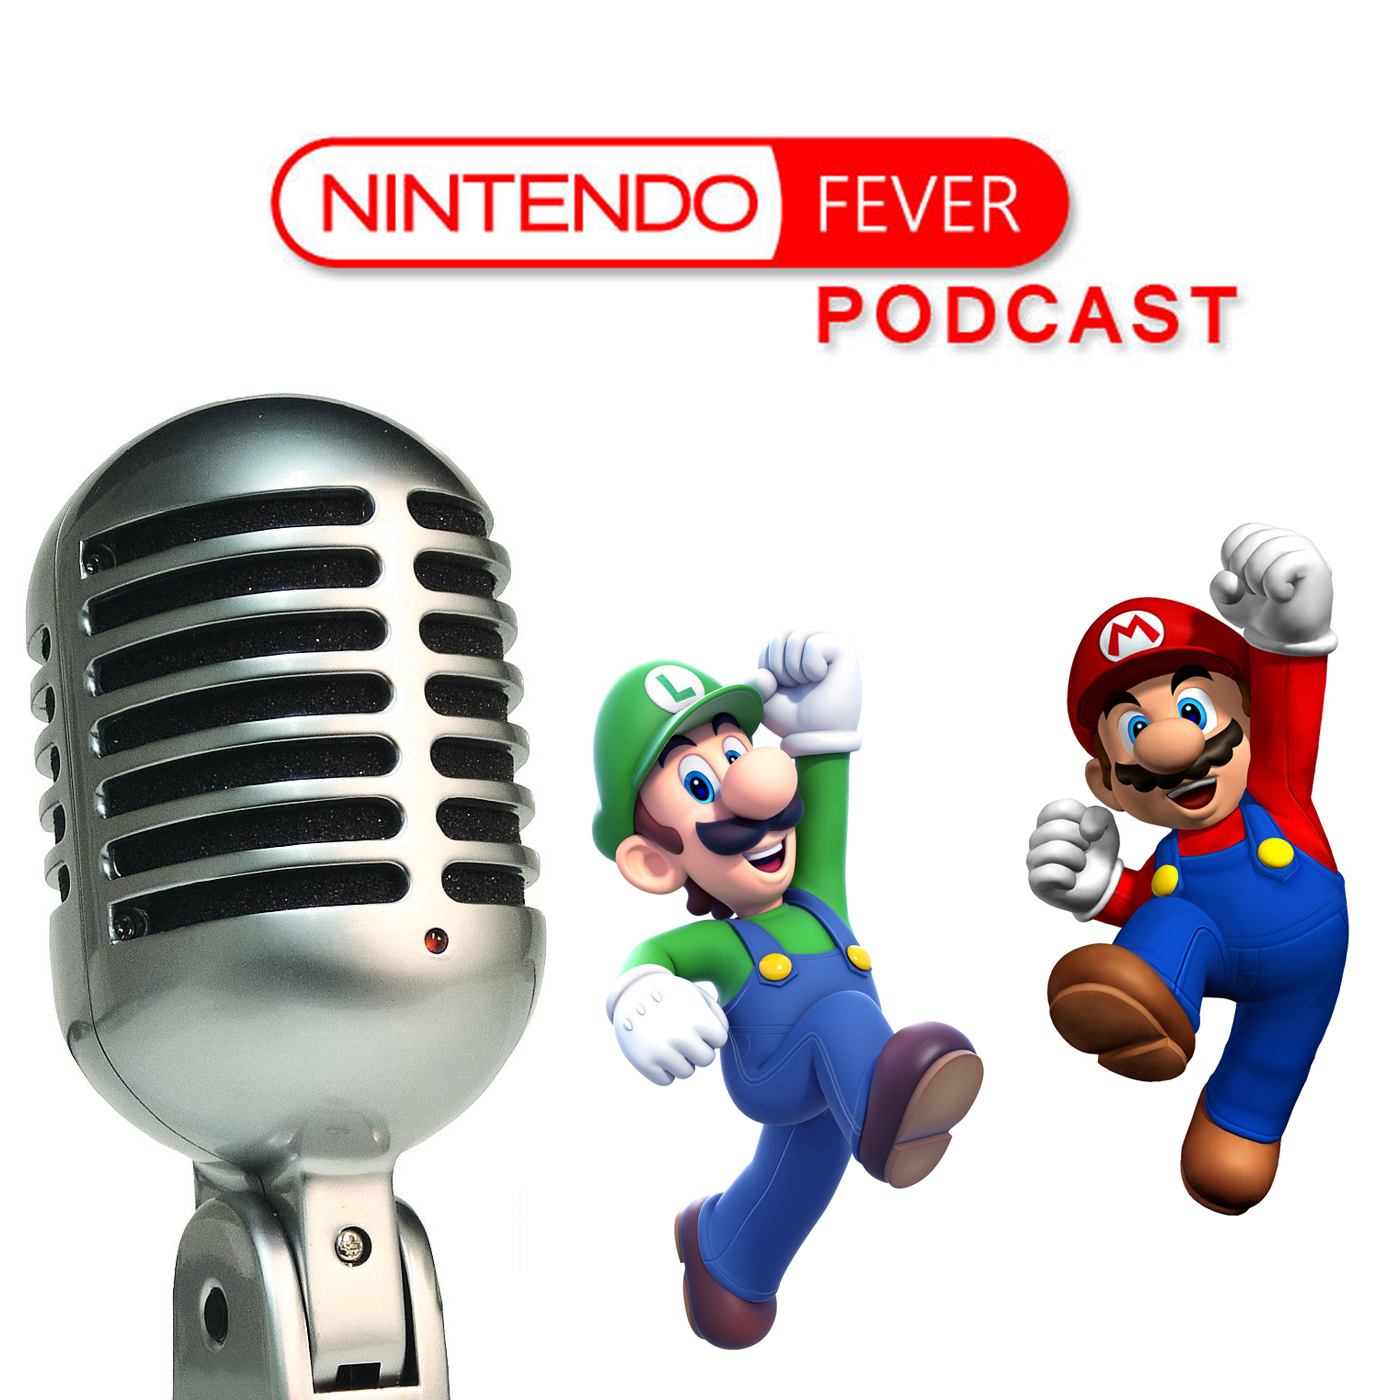 NintendoFever Podcast Episode 99: Direct Online and More feat. Guest Johniibo